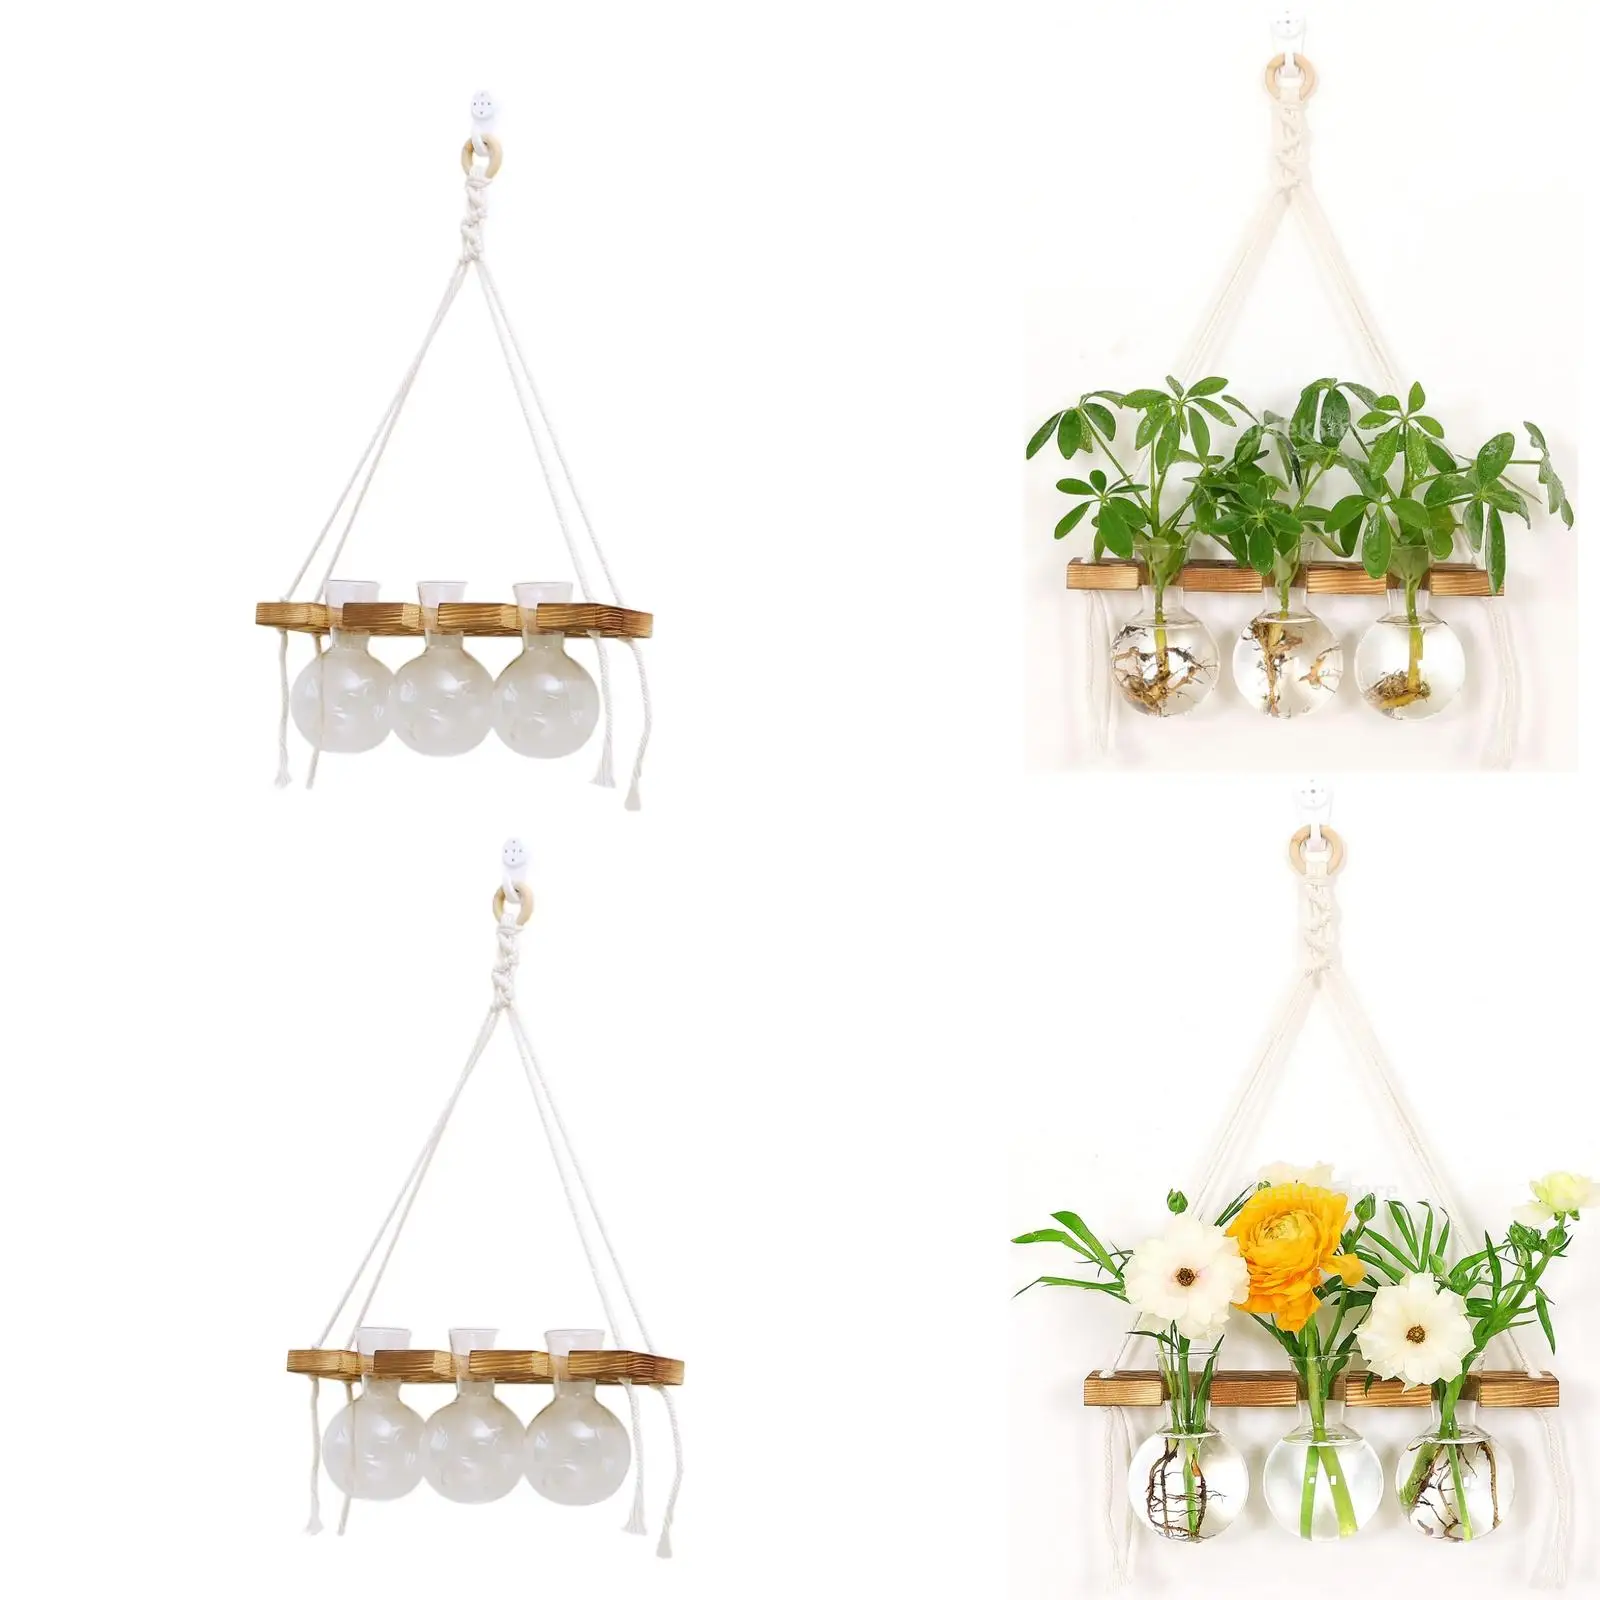 2x Wall Hanging Planter Terrarium for Plants Modern for Home Decor